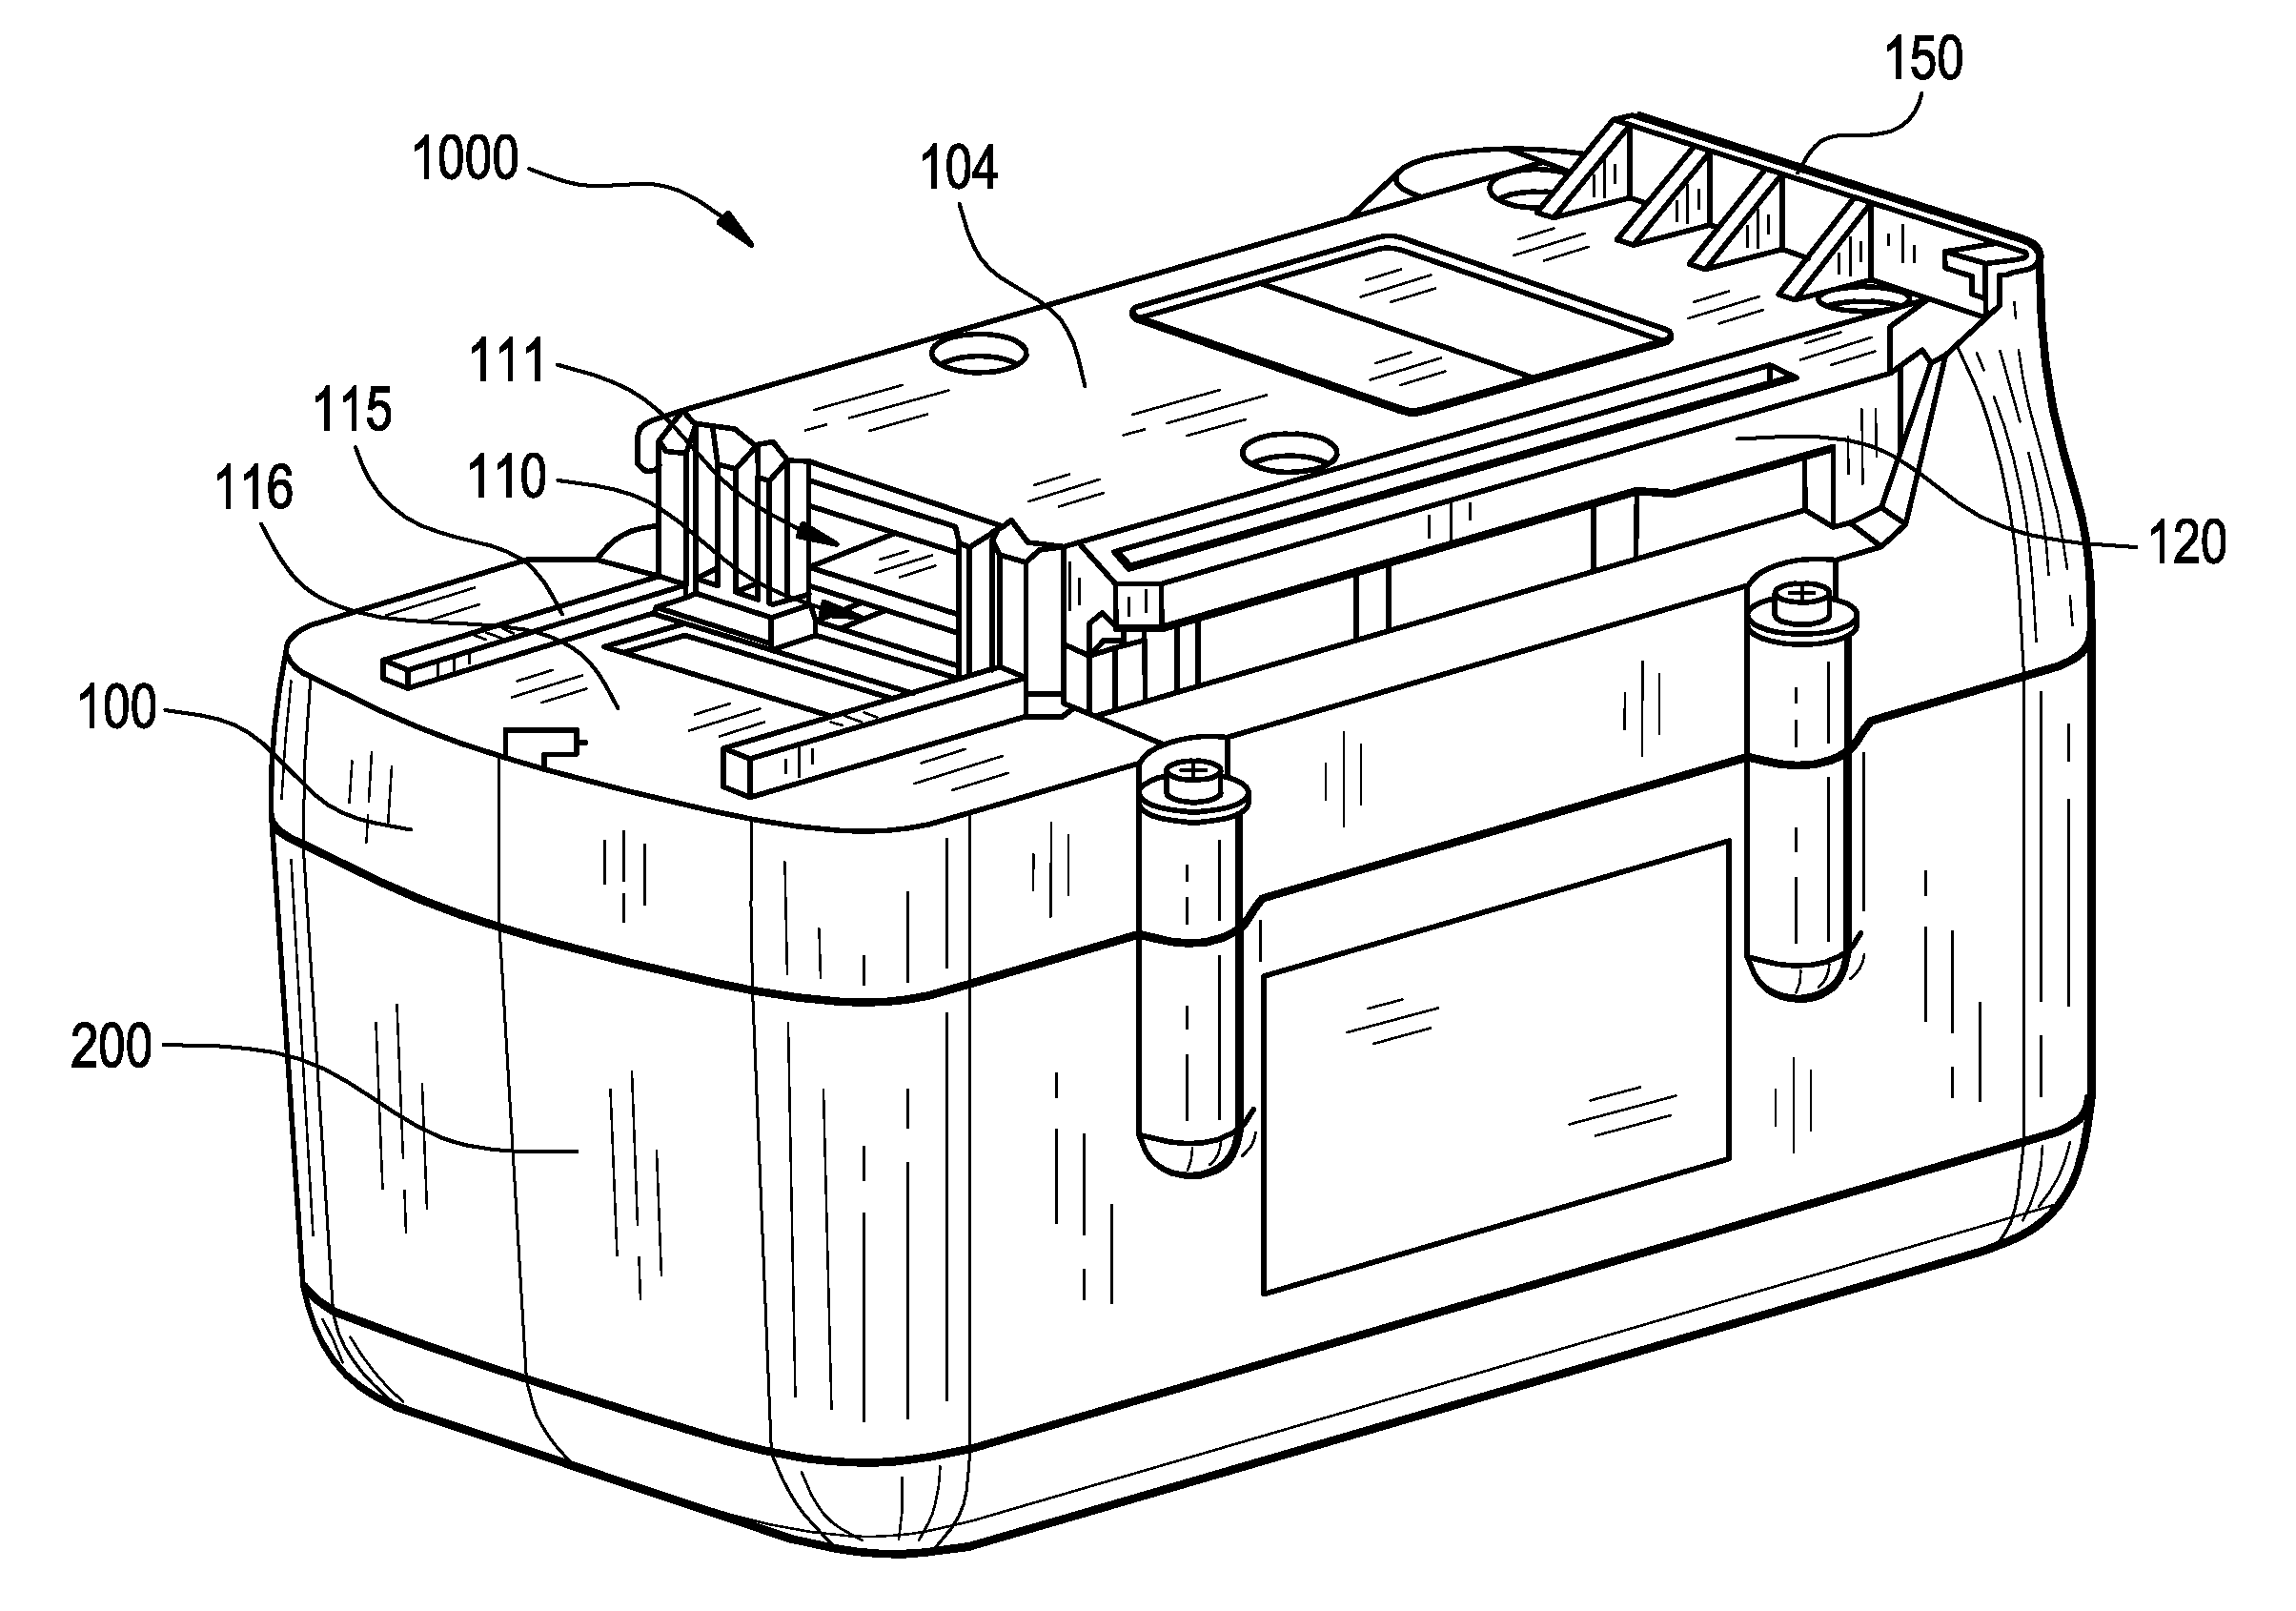 Battery pack and internal component arrangement within the battery pack for cordless power tool system